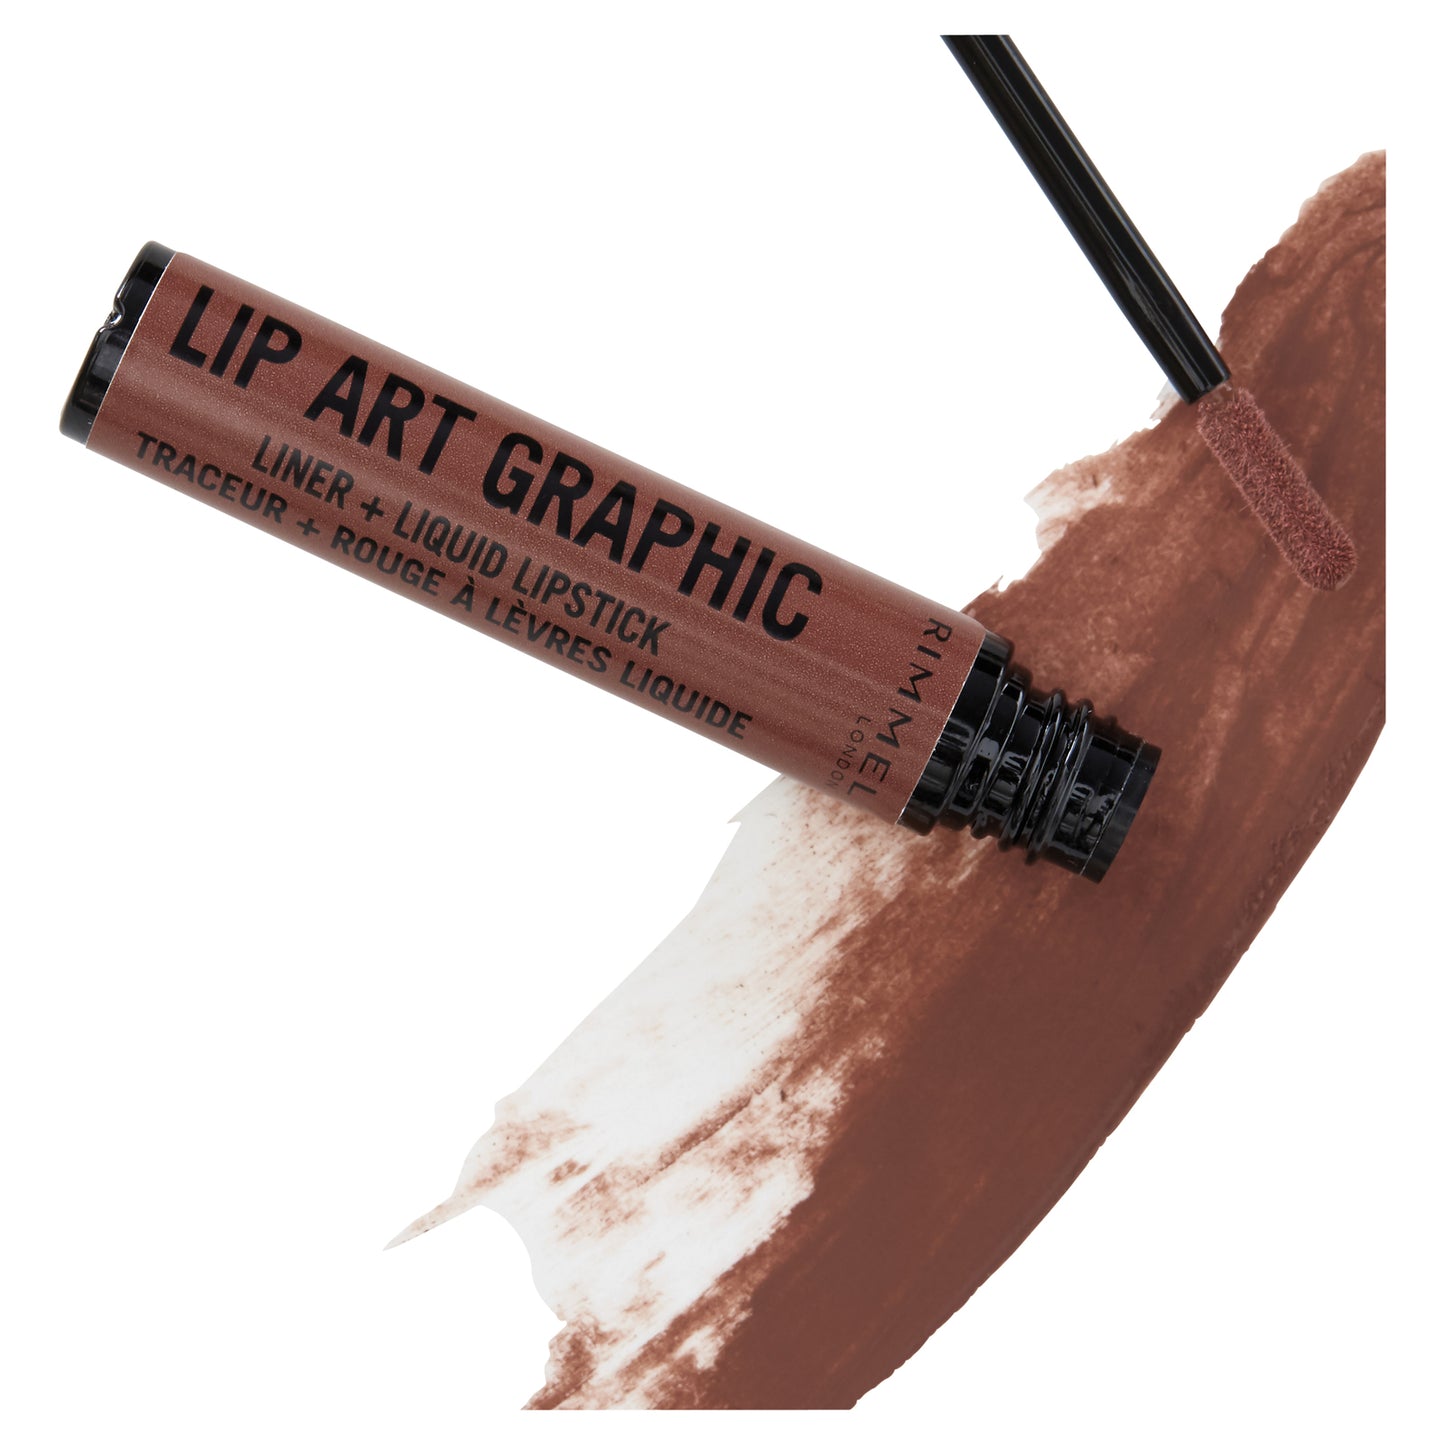 Rimmel London Lip Art Graphic 2 in 1 Liner and Liquid Lipstick 1.8mL - 760 Now or Never